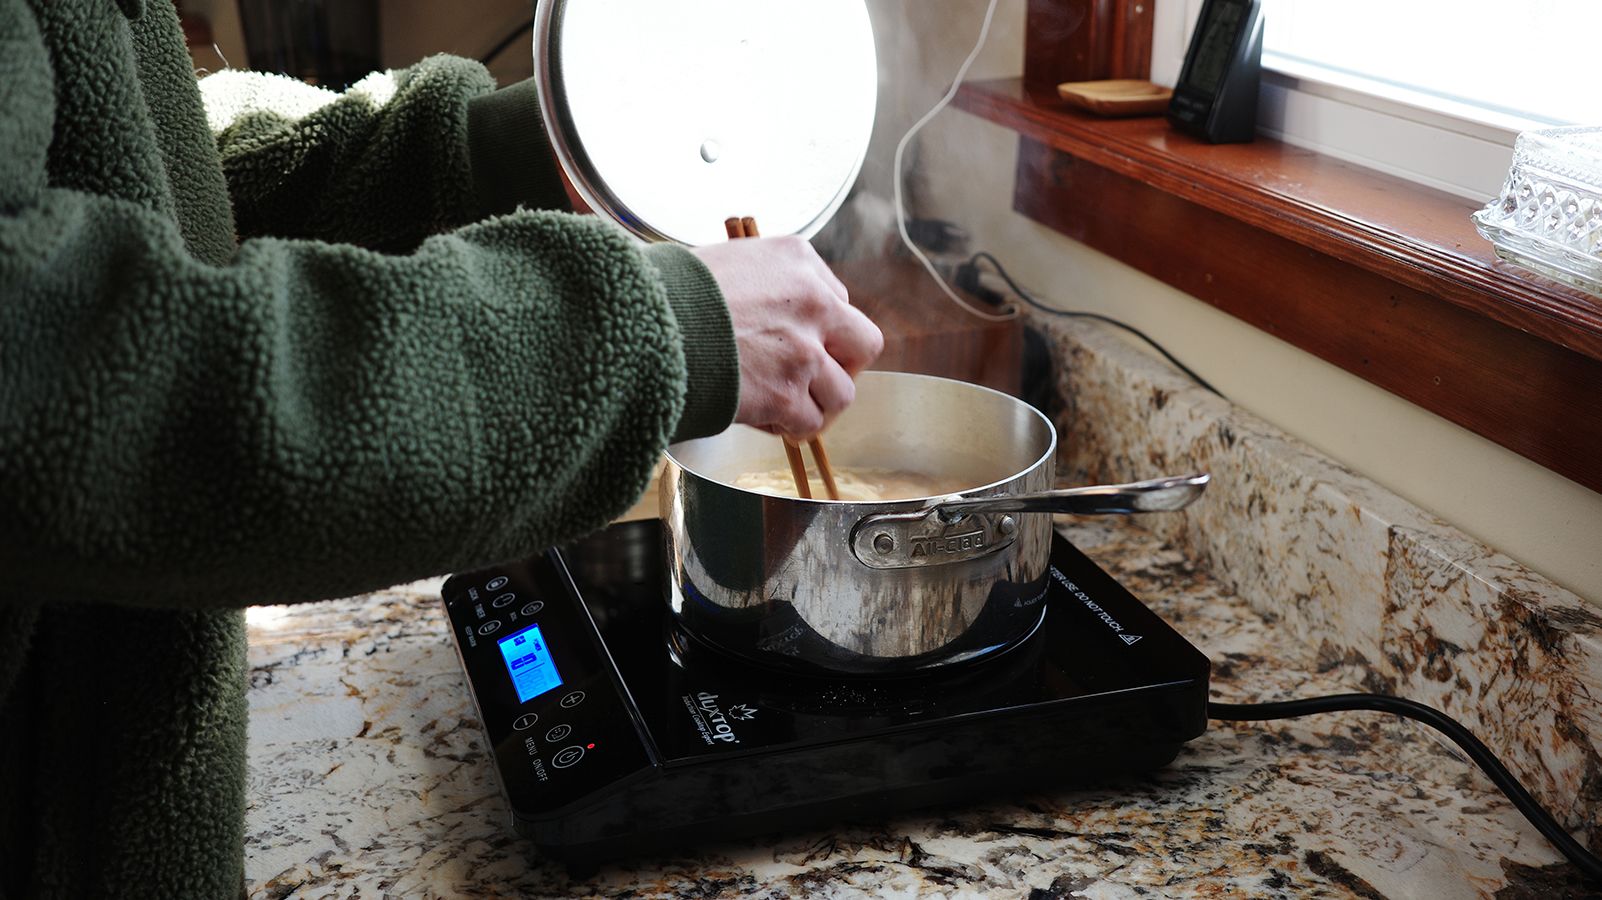 Portable Cooktop Induction Stove Hot Plate Induction Plate Electric Cooktop